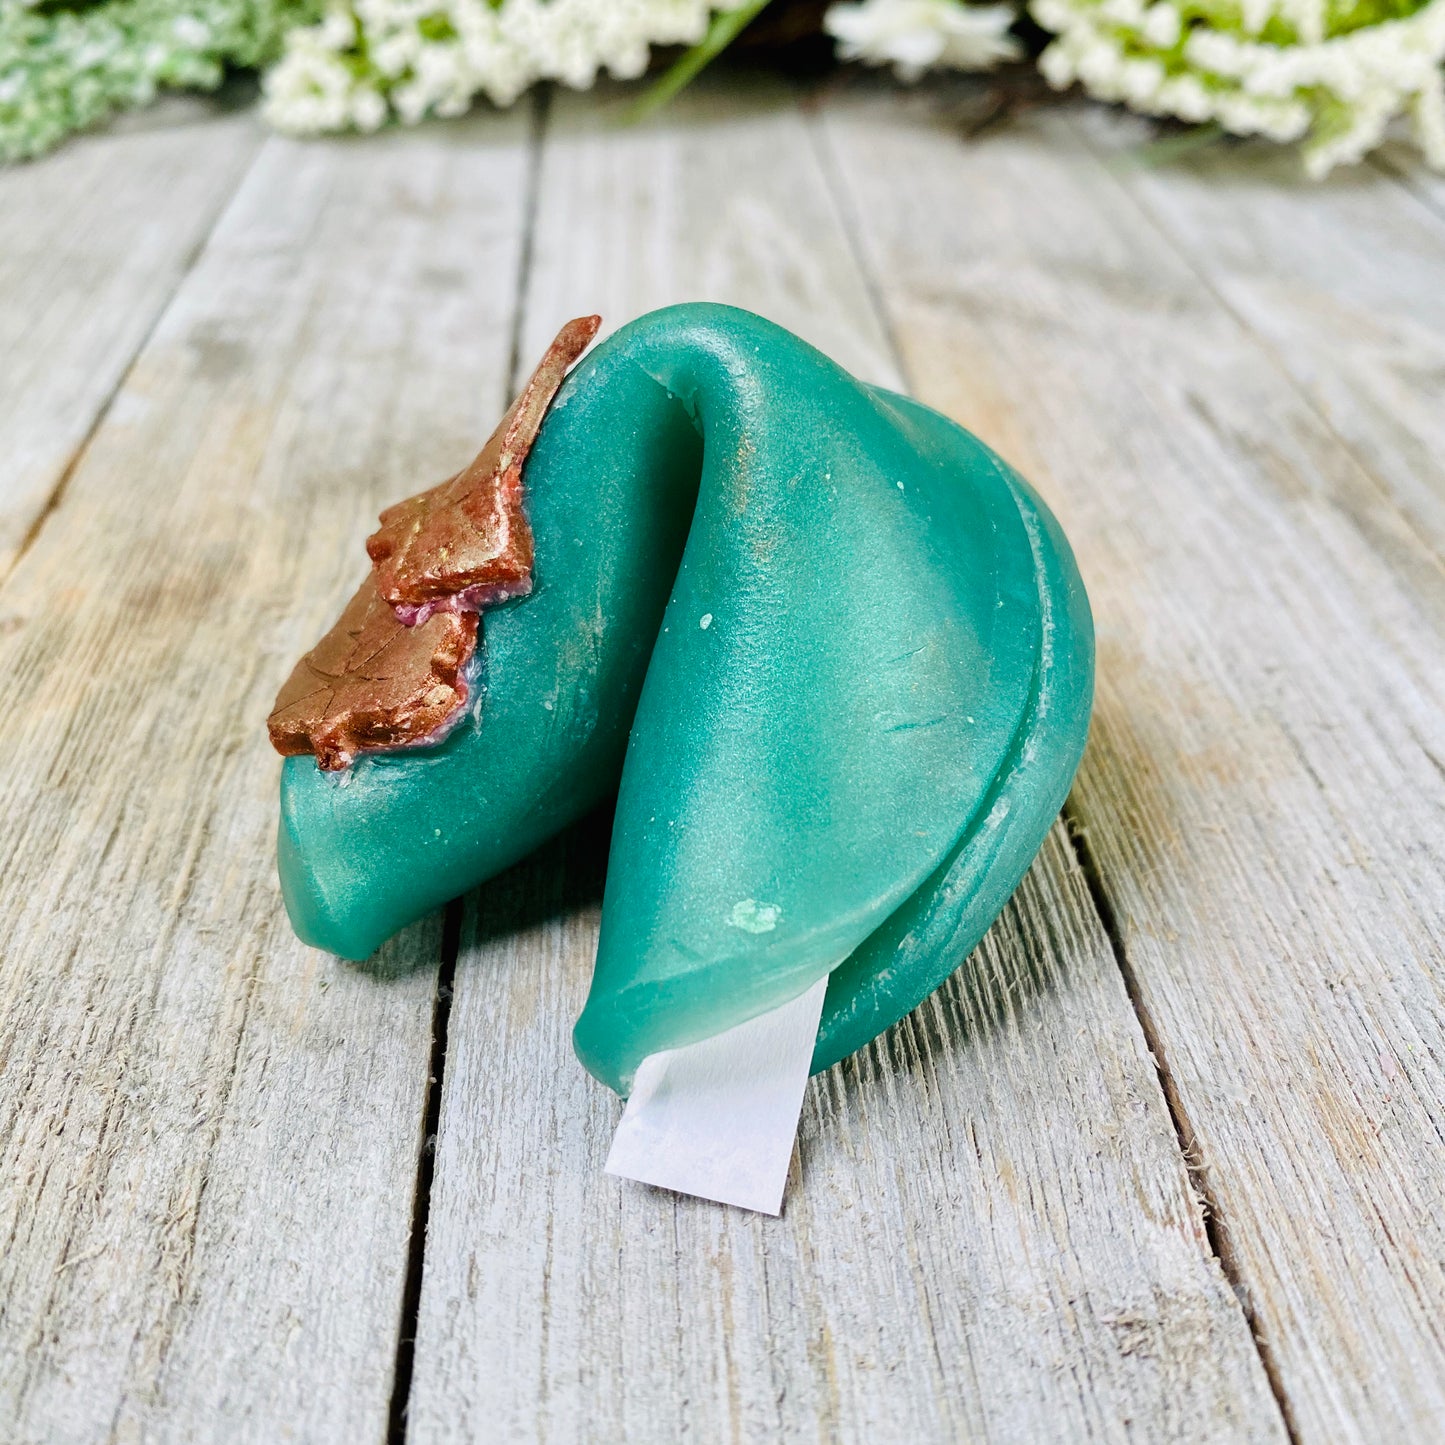 GARDEN PARTY Fortune Cookie Soap